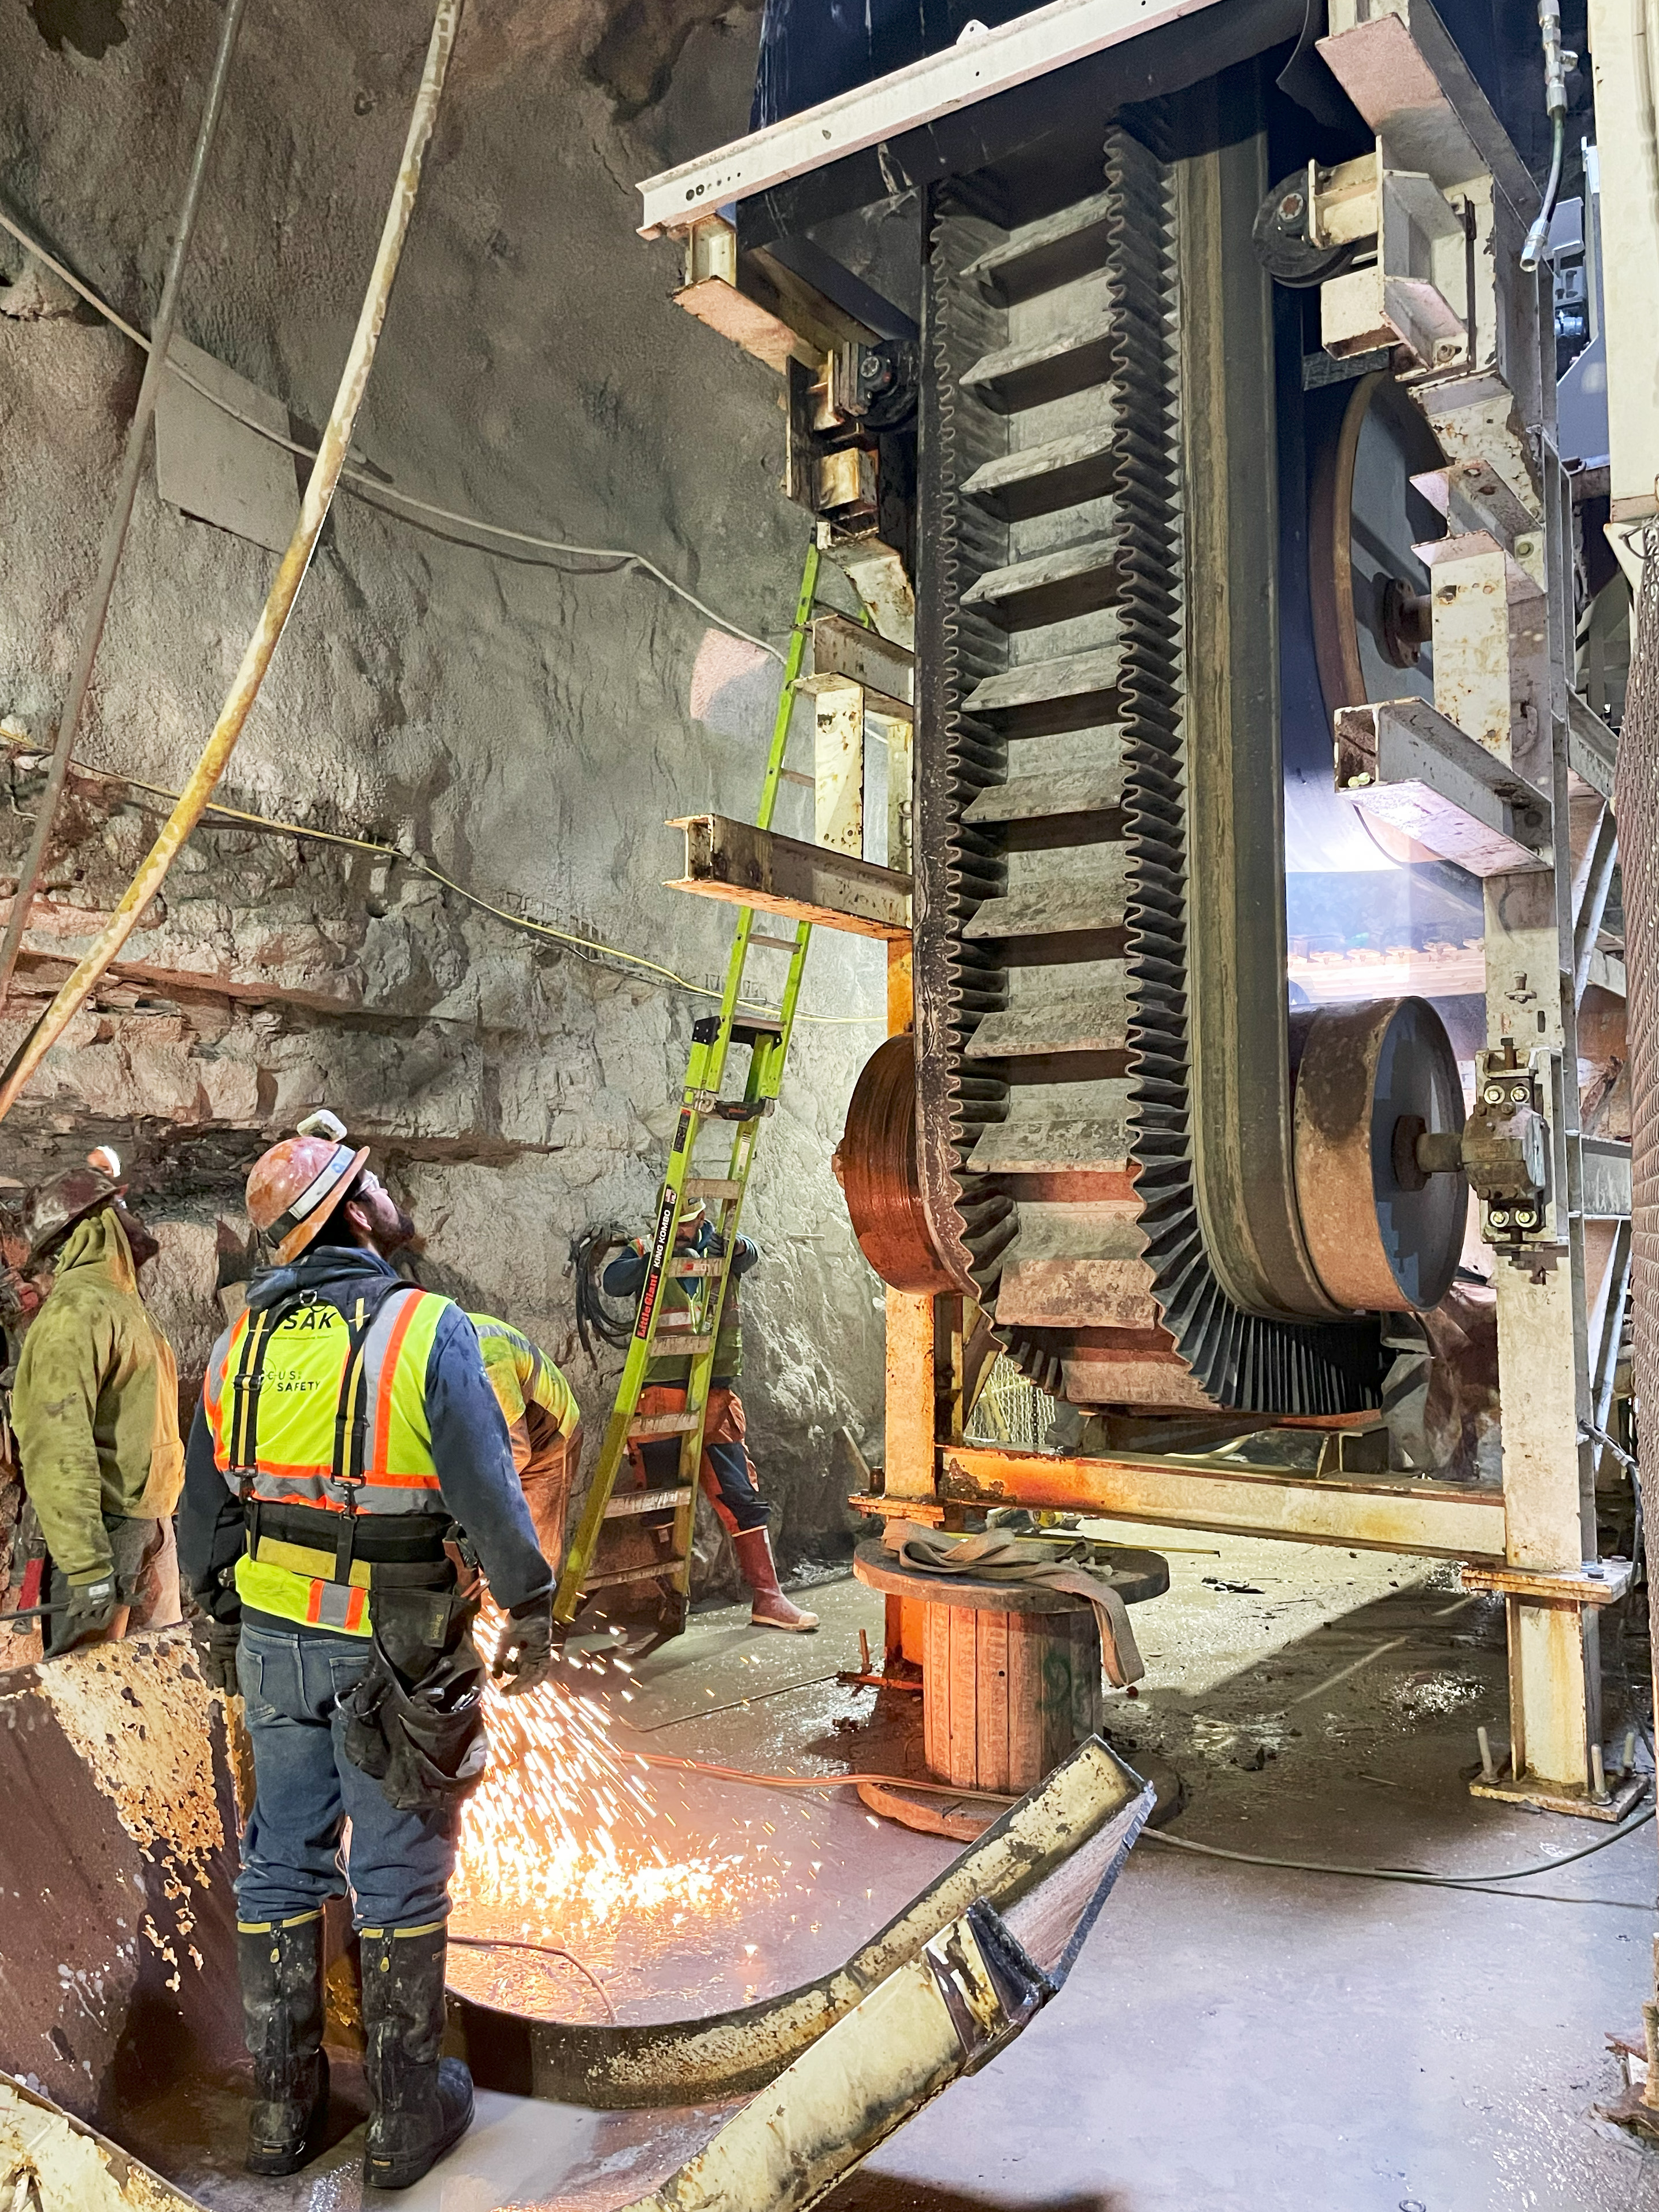 Honorable mention photo by Hamid Rostami : Lowe Meramec Tunnel, St. Louis, MO “Setting up the Tunnel Boring Machine's conveyor inside the tunnel.”